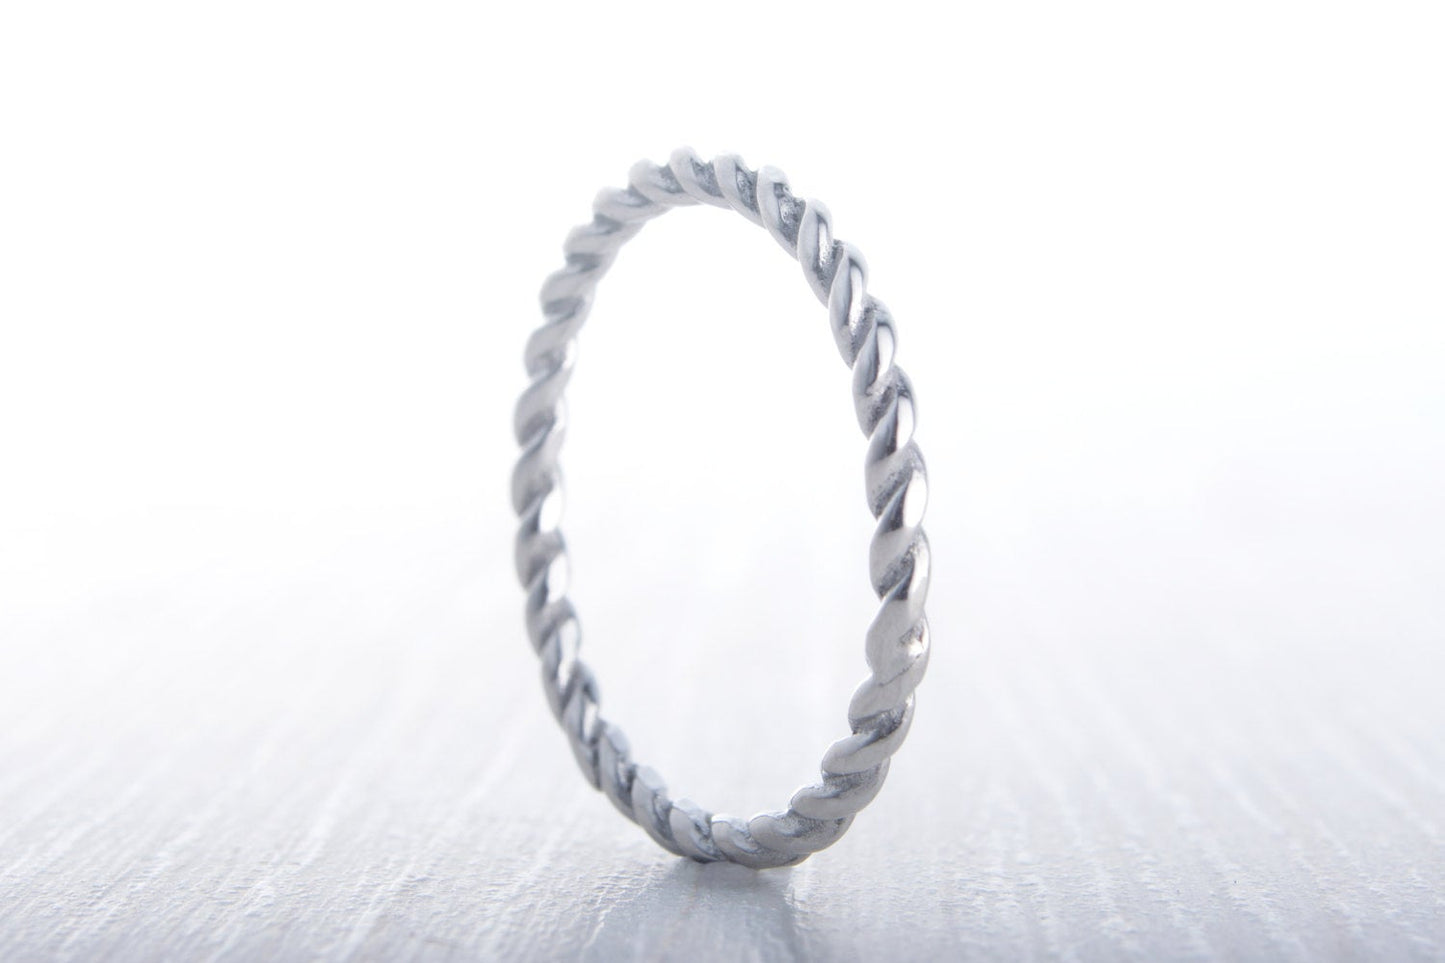 2mm twist Weave Ring available in titanium and white gold filled - wedding ring - wedding band - promise ring